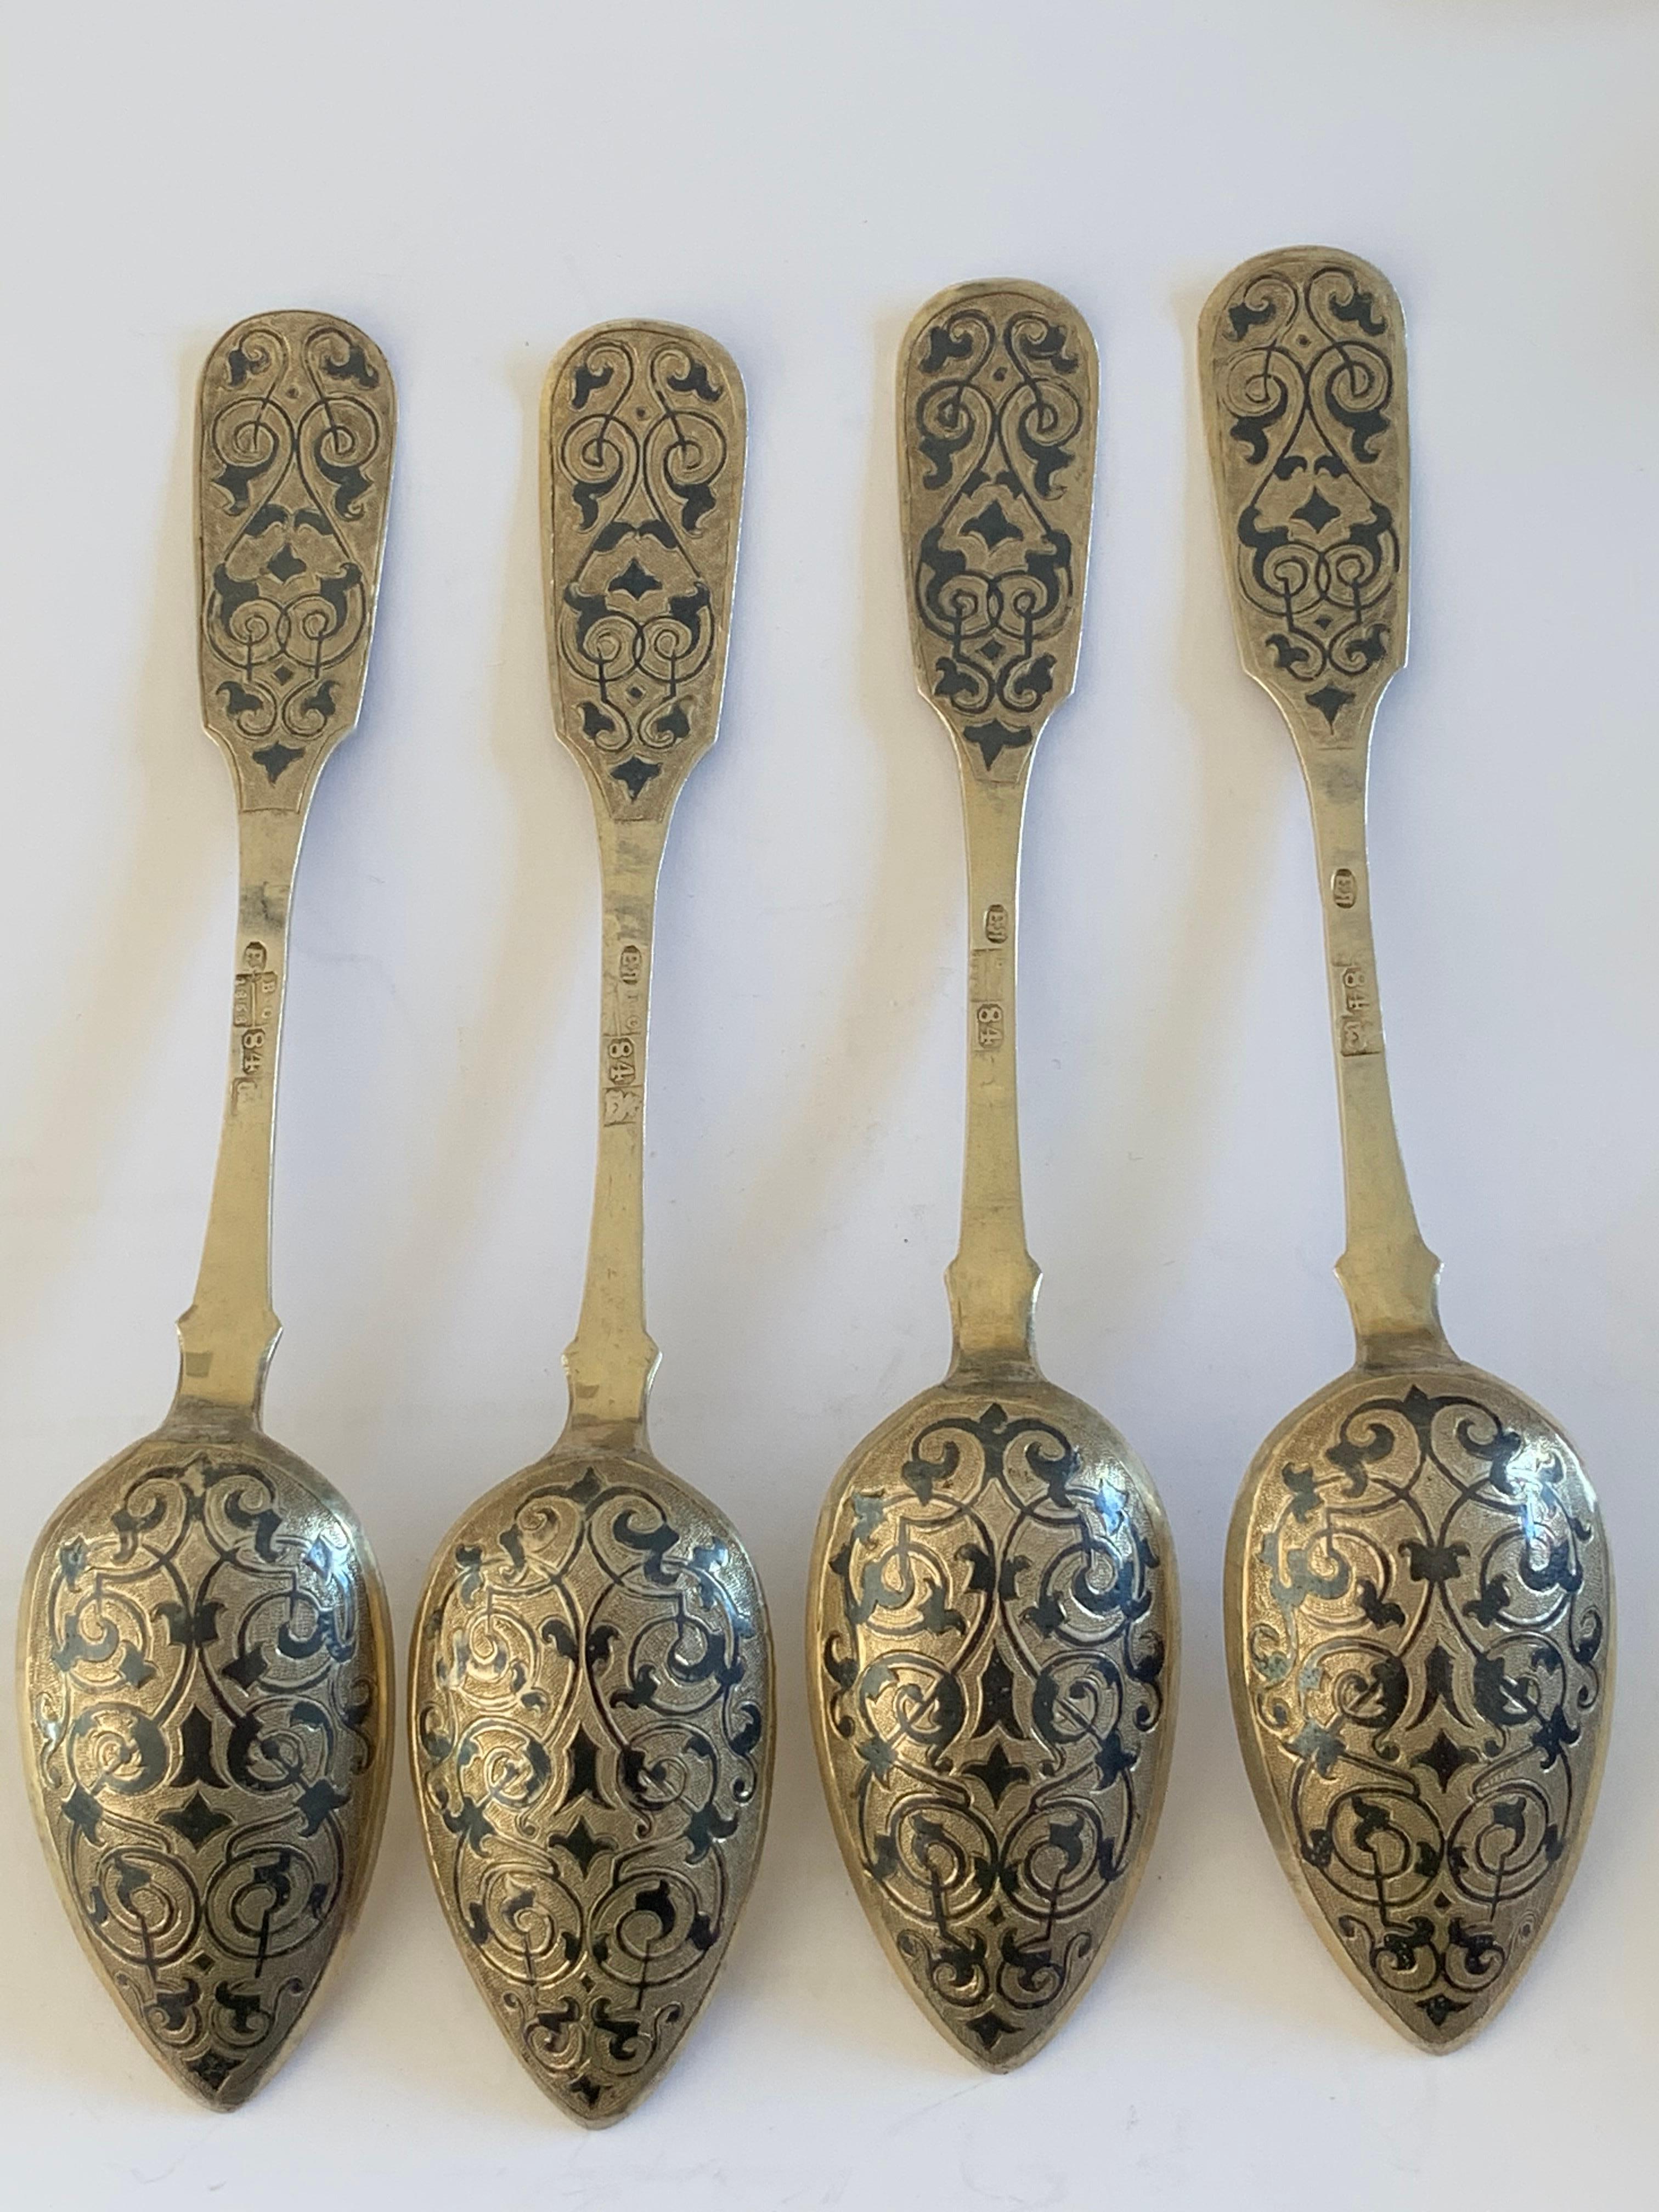 Great set of 4 Russian silver and Niello spoons dated 1858, the bowls are gilded.
 
   